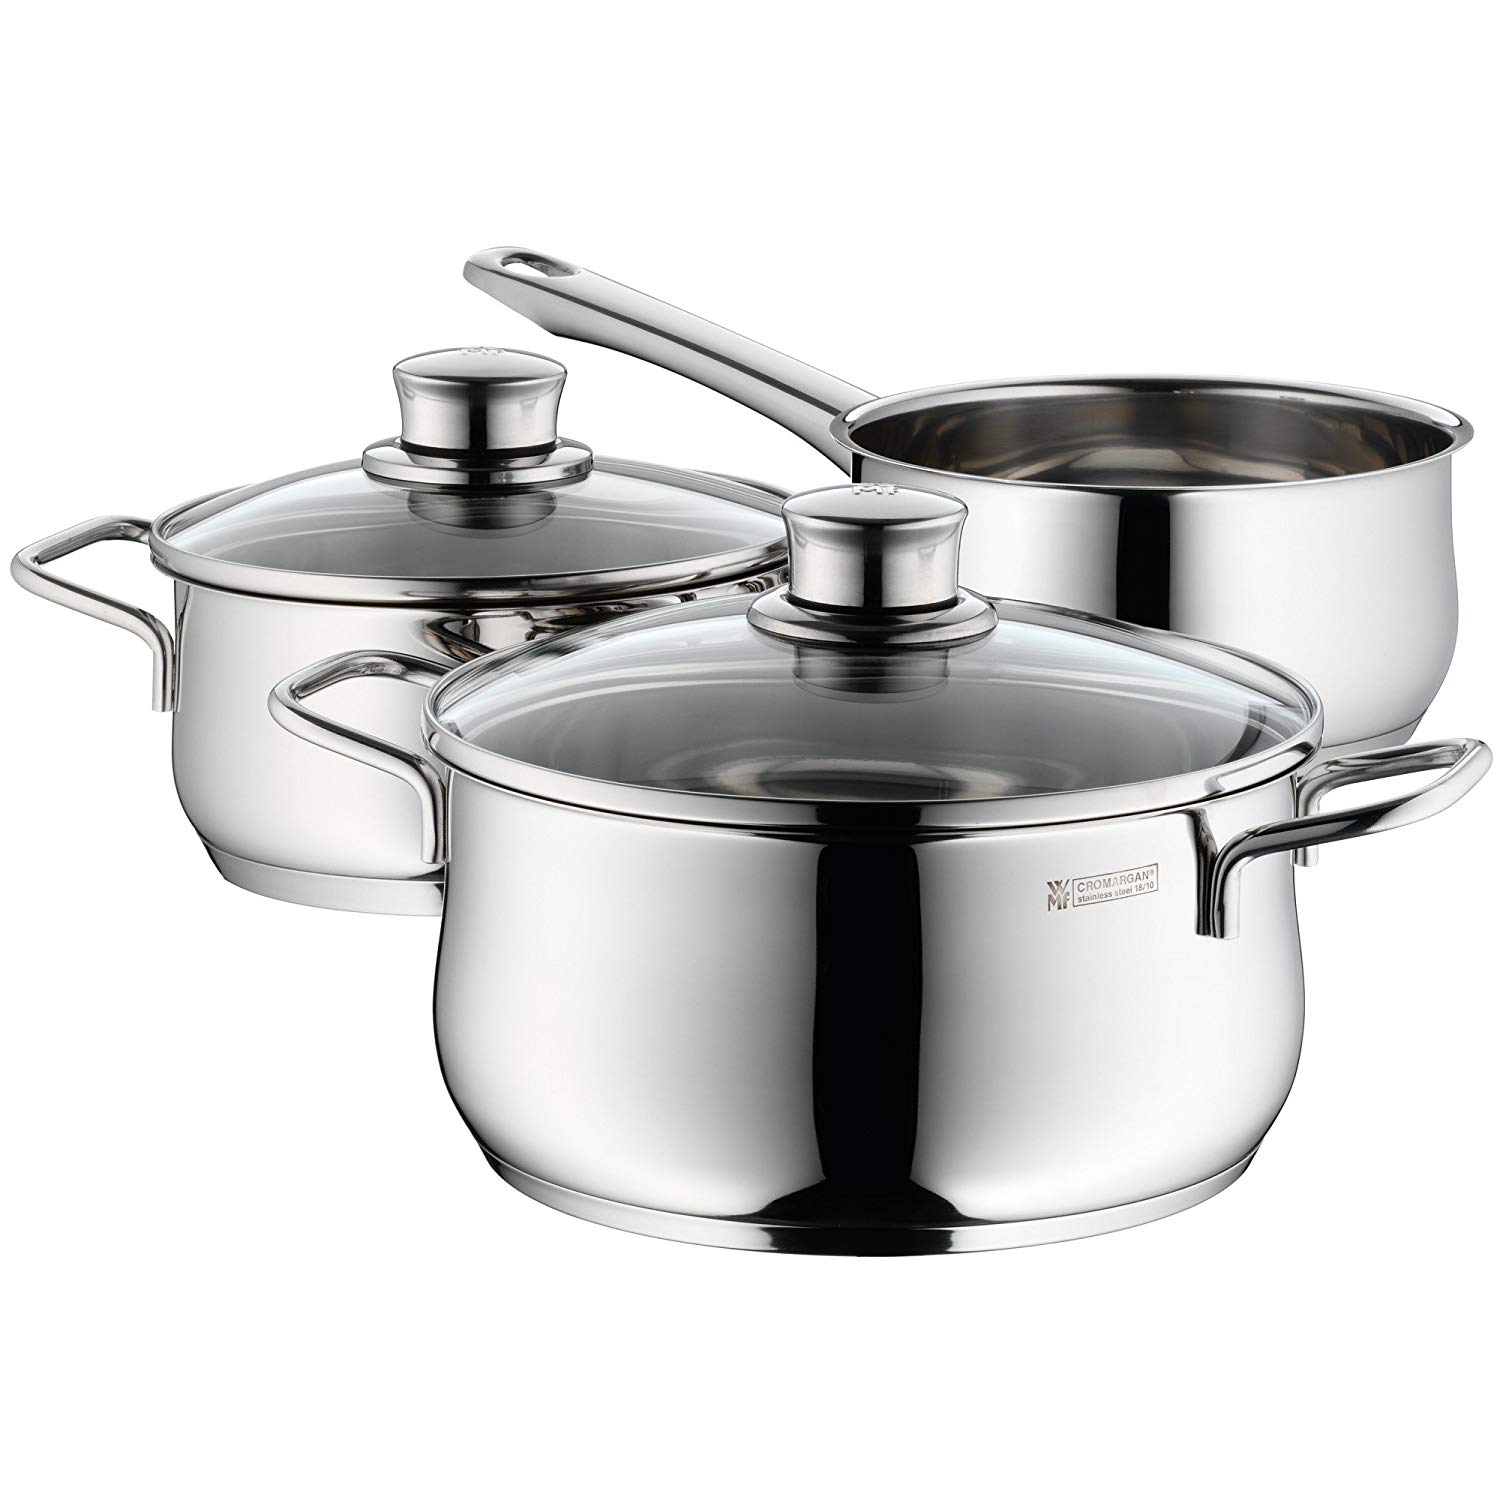 Wmf Diadem Plus 3 Pieces Polished 18/10 Cromargan Stainless Steel Suitable 